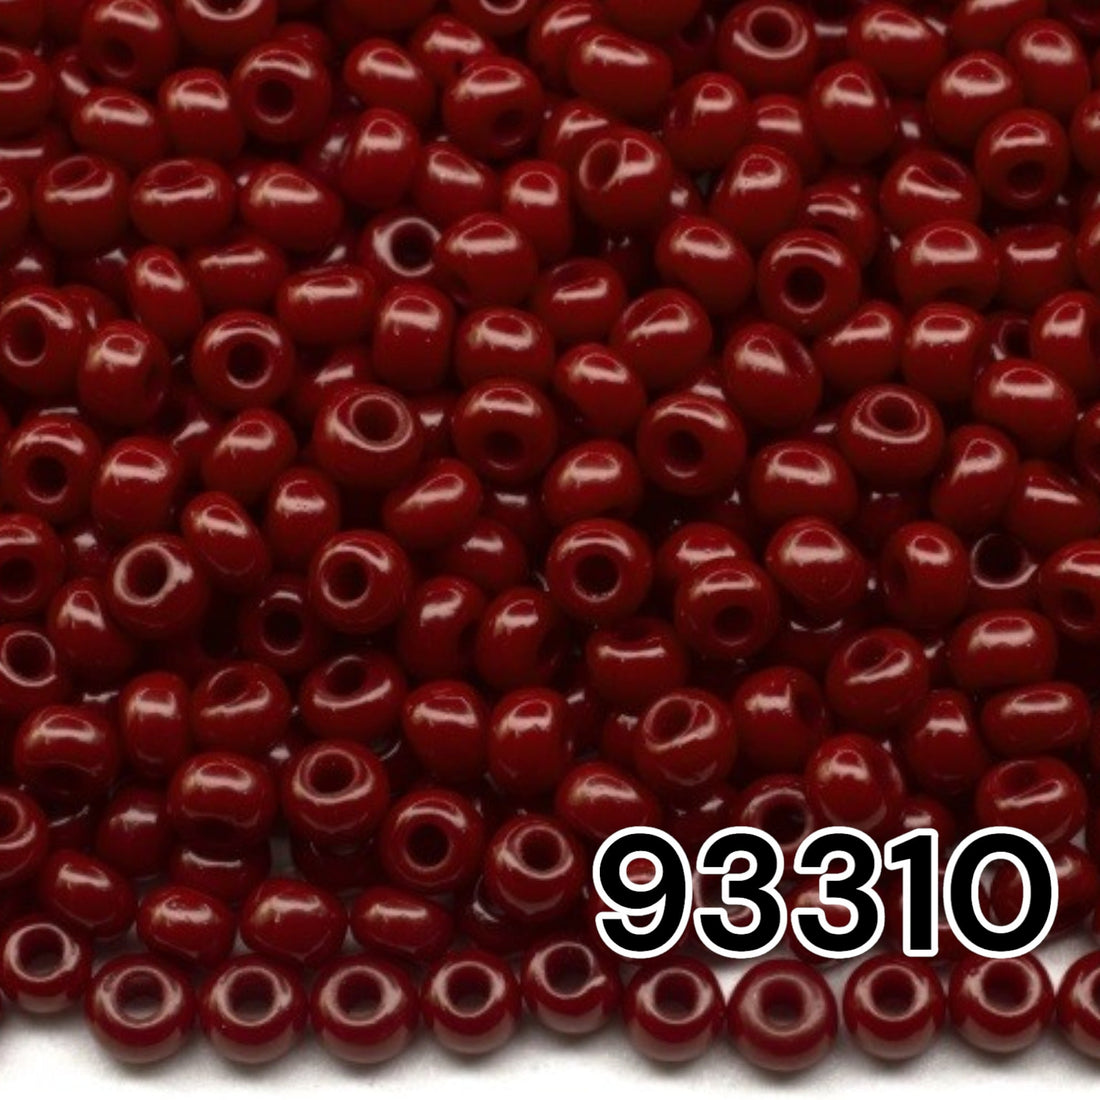 Crafters' Favorite Glass Beads